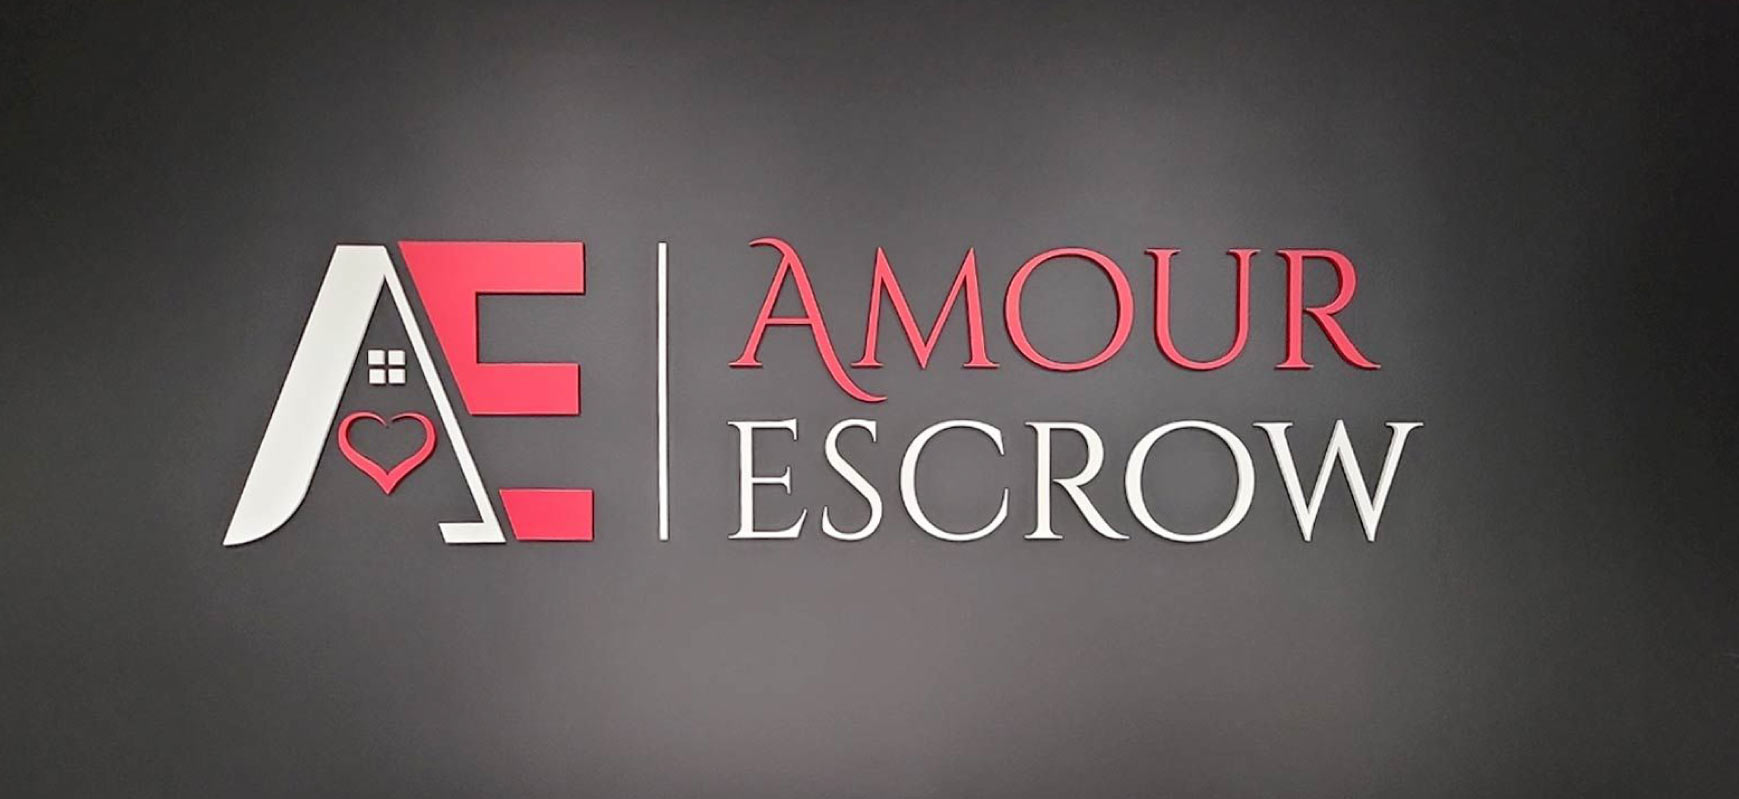 Amour Escrow trendy sign showing the brand name and logo made of acrylic for interior branding